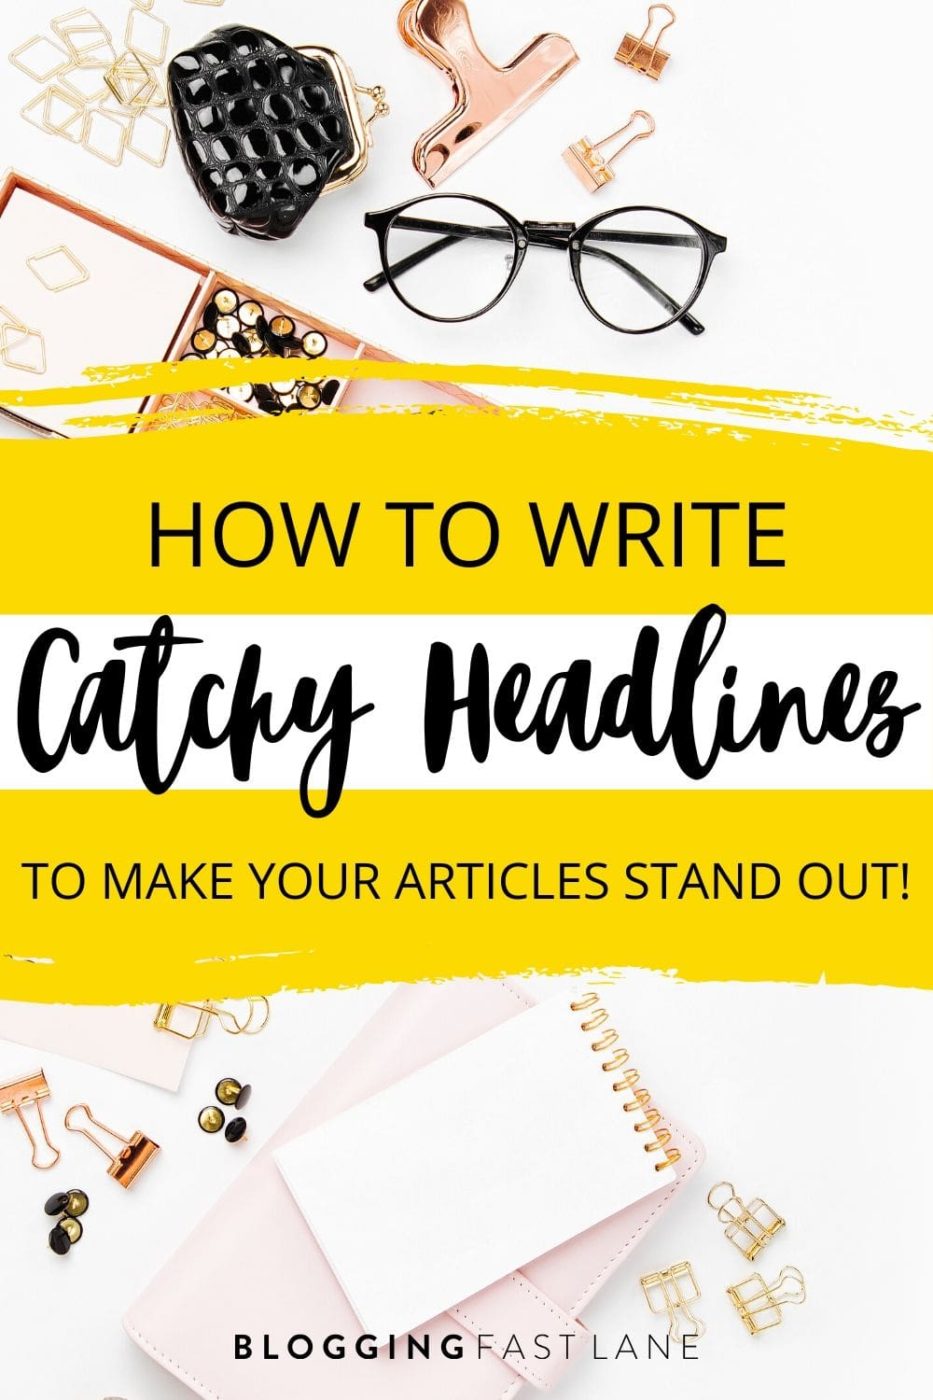 How to Write Catchy Headlines | Spice up your articles and increase traffic by writing catchy headlines. Don't know how? Check out our article that has four steps to follow, plus loads of examples!